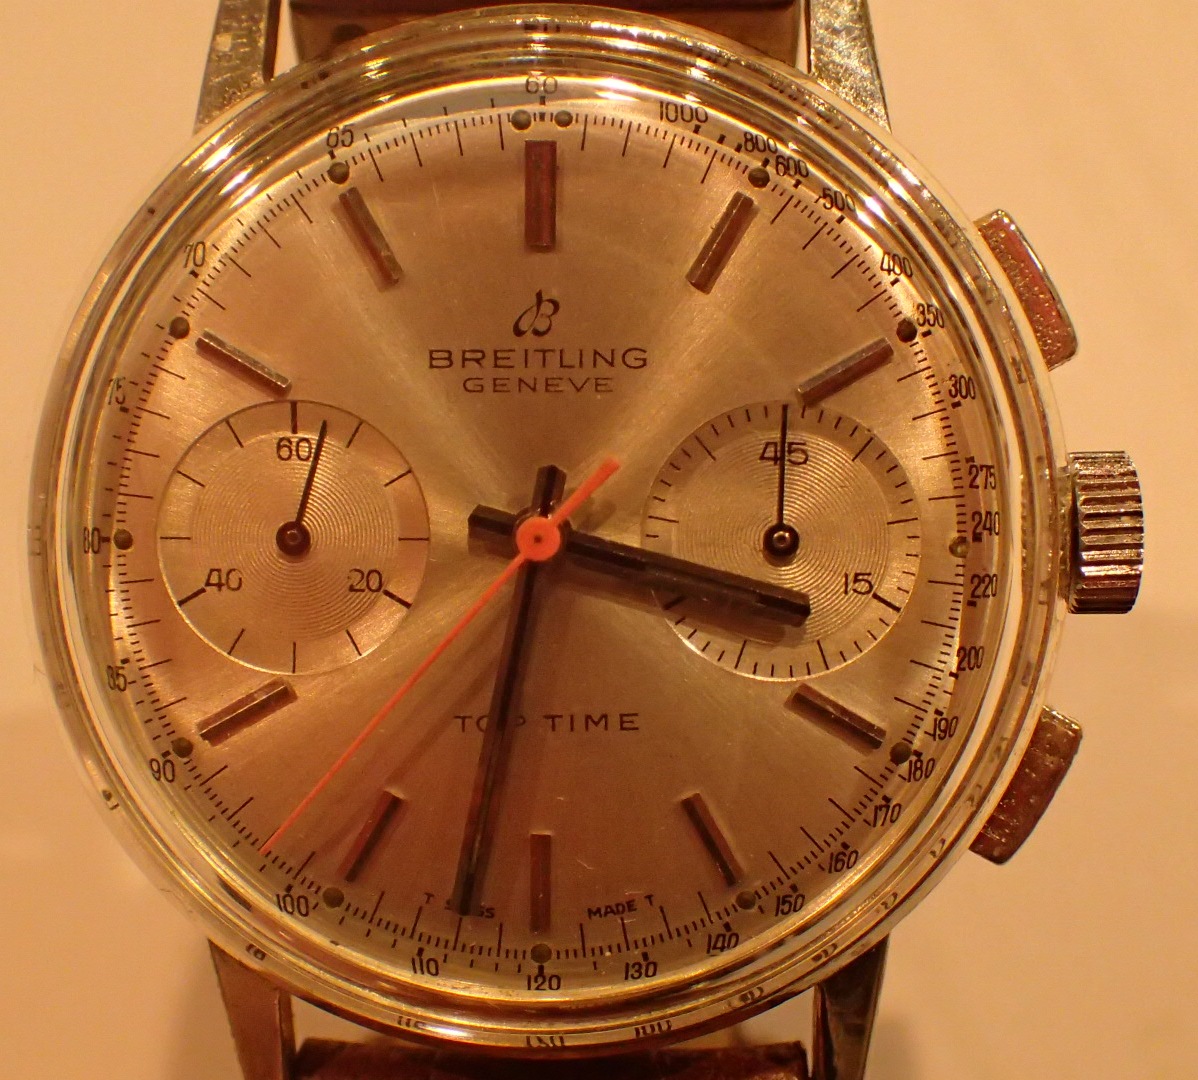 Gents Breitling vintage Top Time chronograph wristwatch recently serviced silver dial and brown - Image 3 of 3